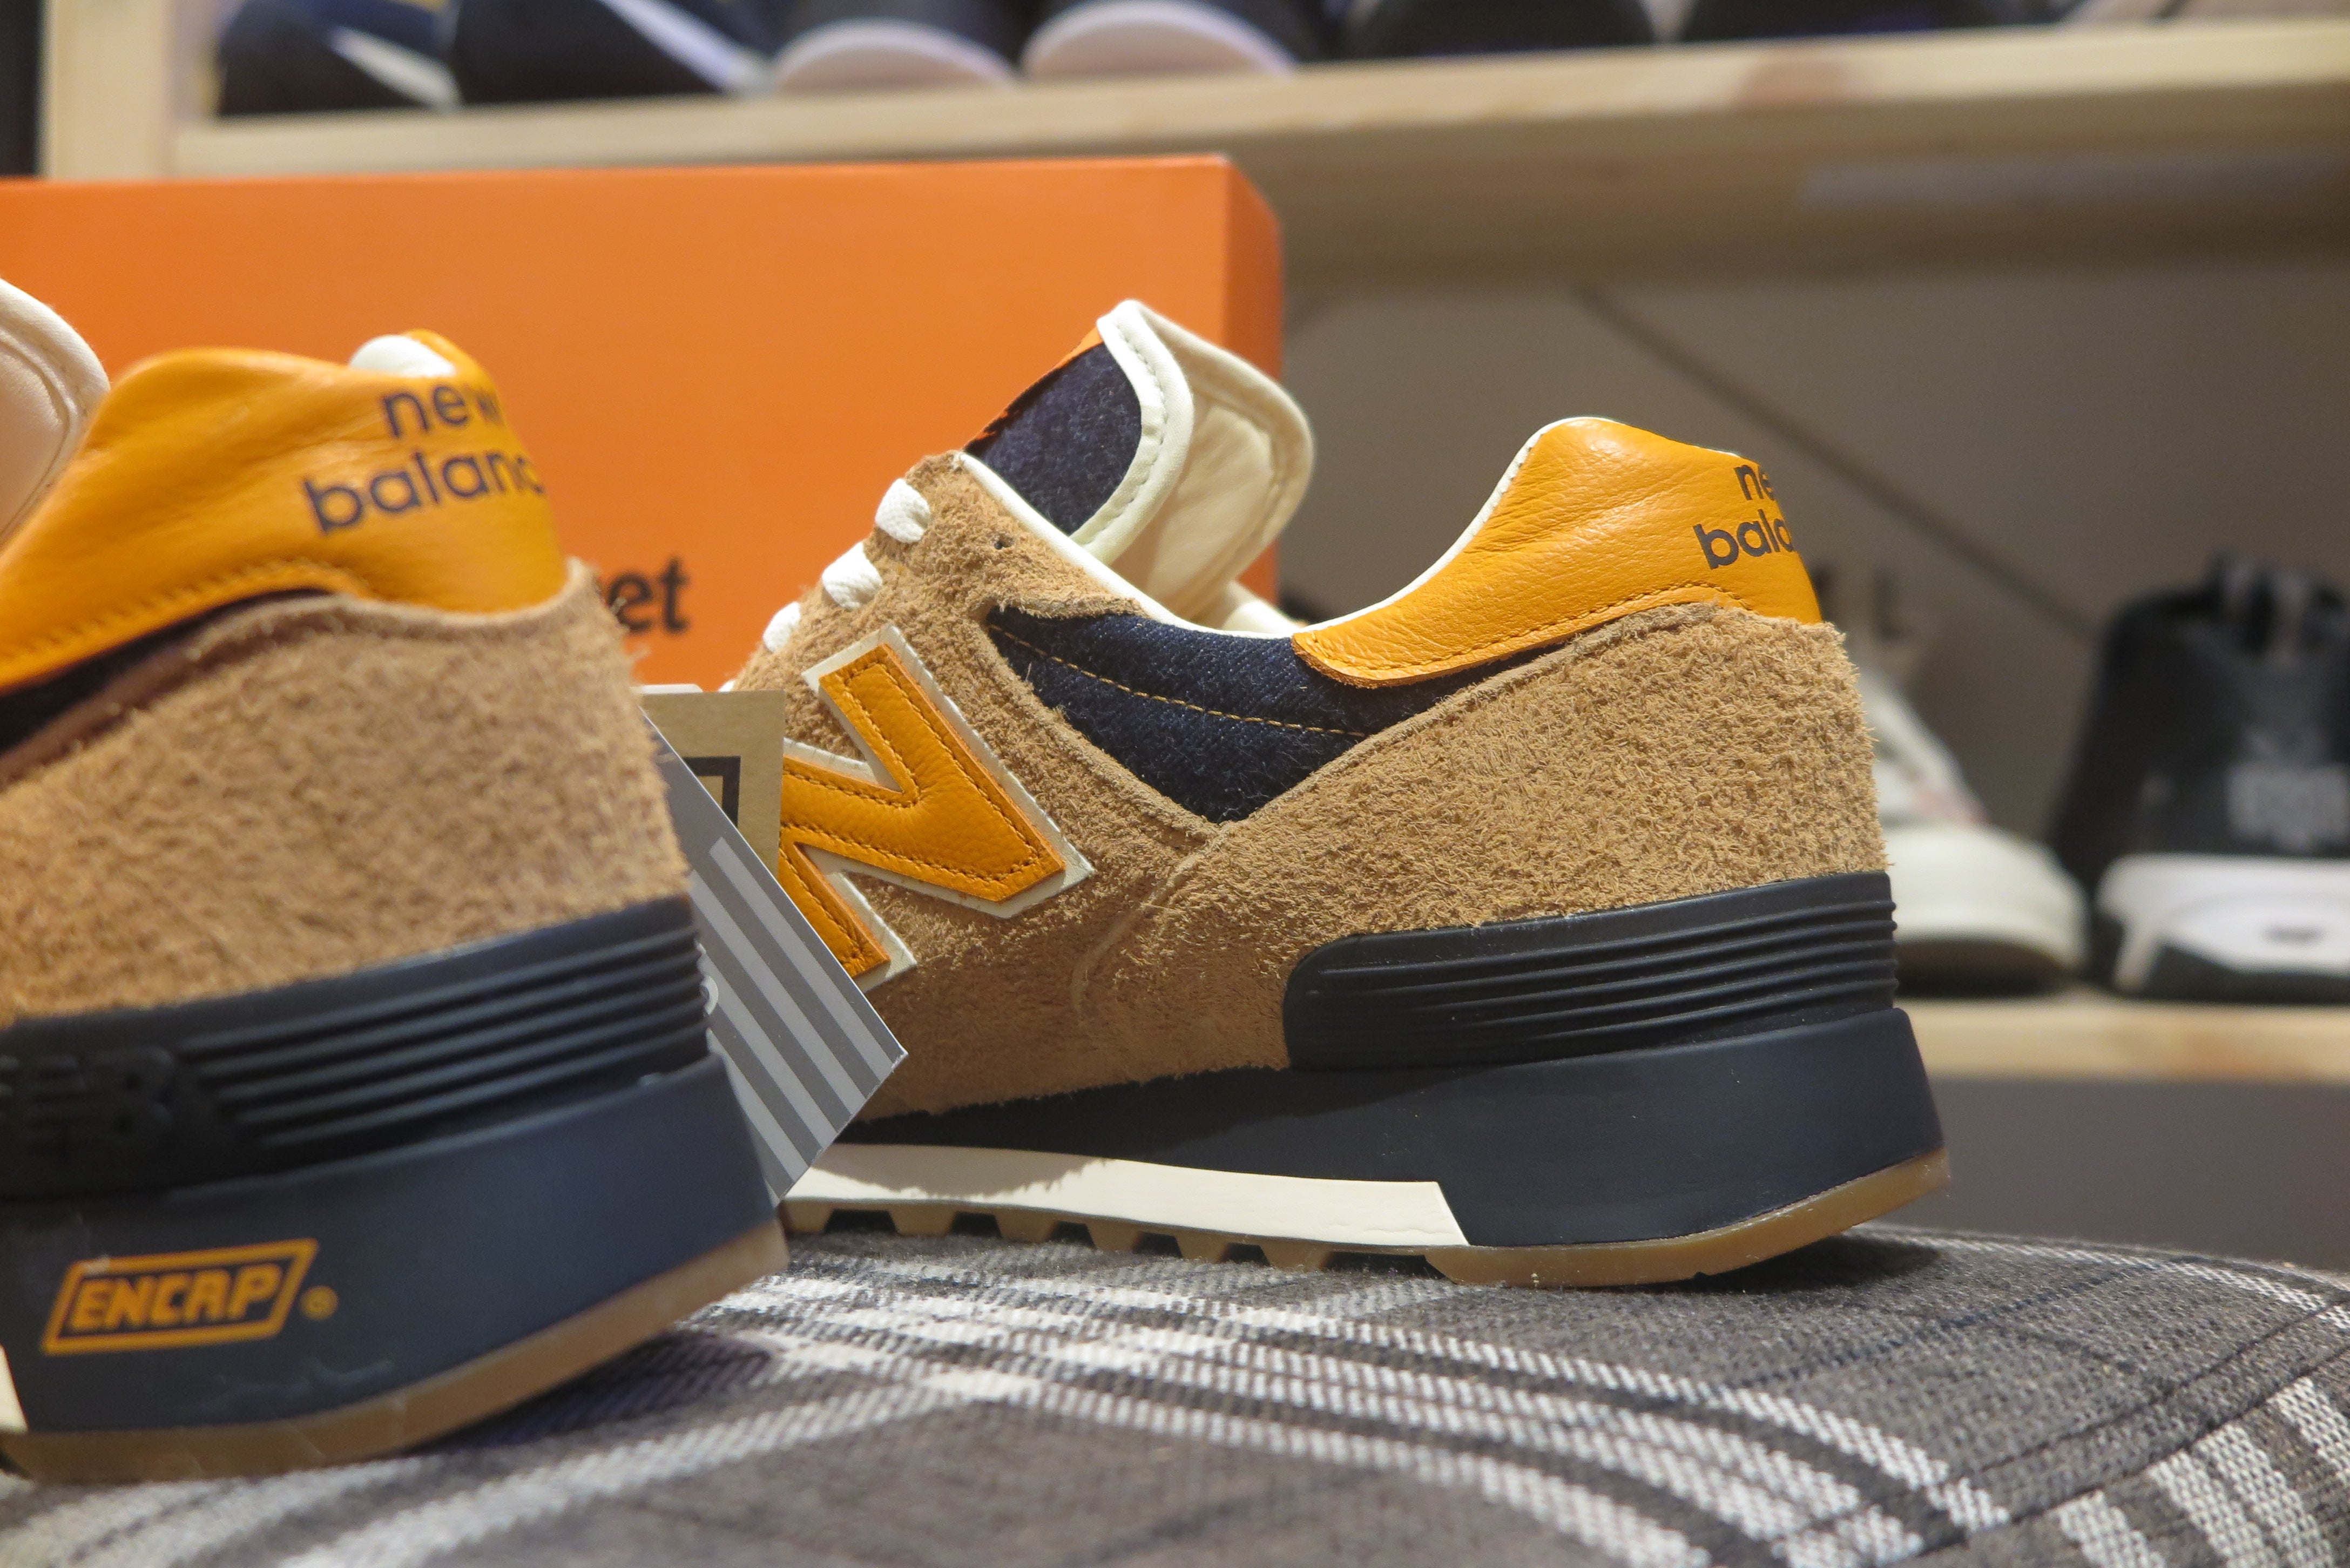 Levi's × New Balance M1300LV Made in US